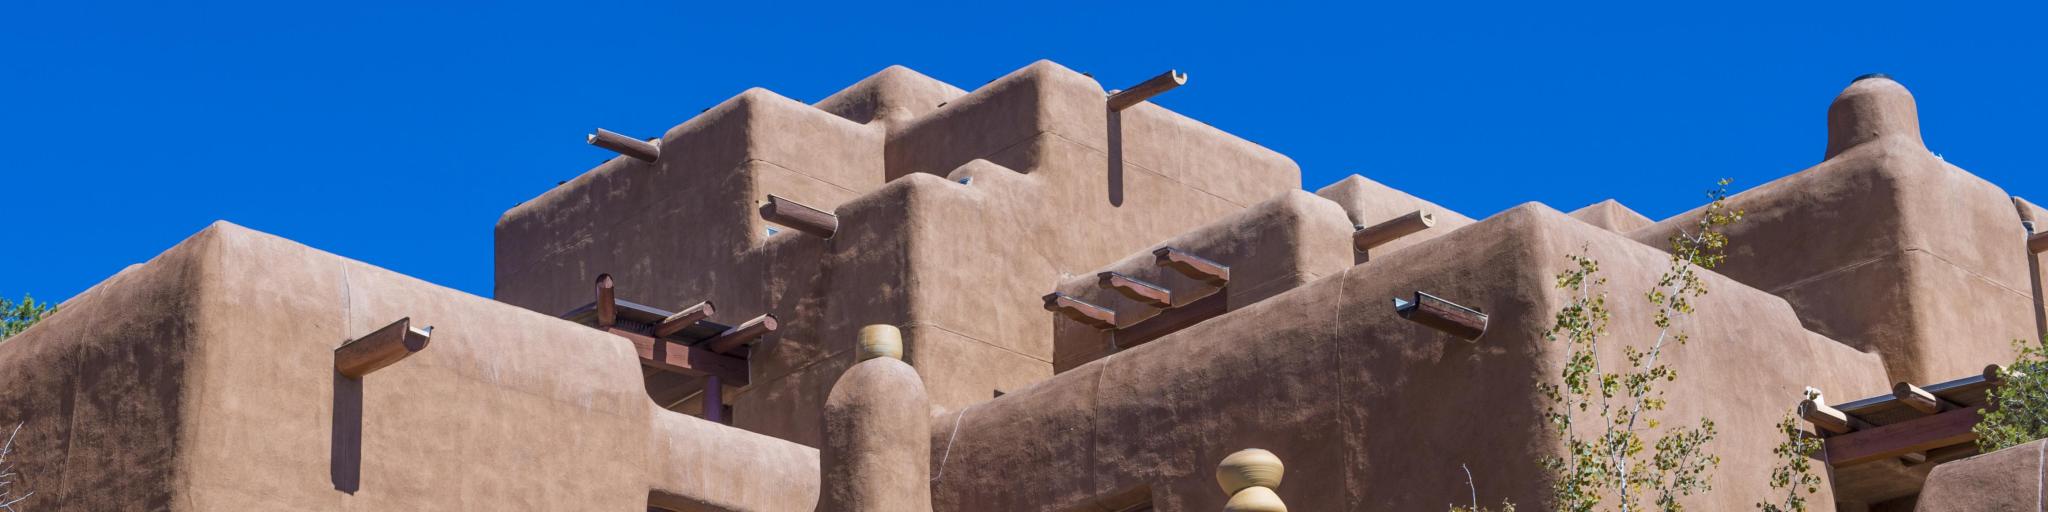 Traditional adobe house in Santa Fe on a sunny day with blue sky